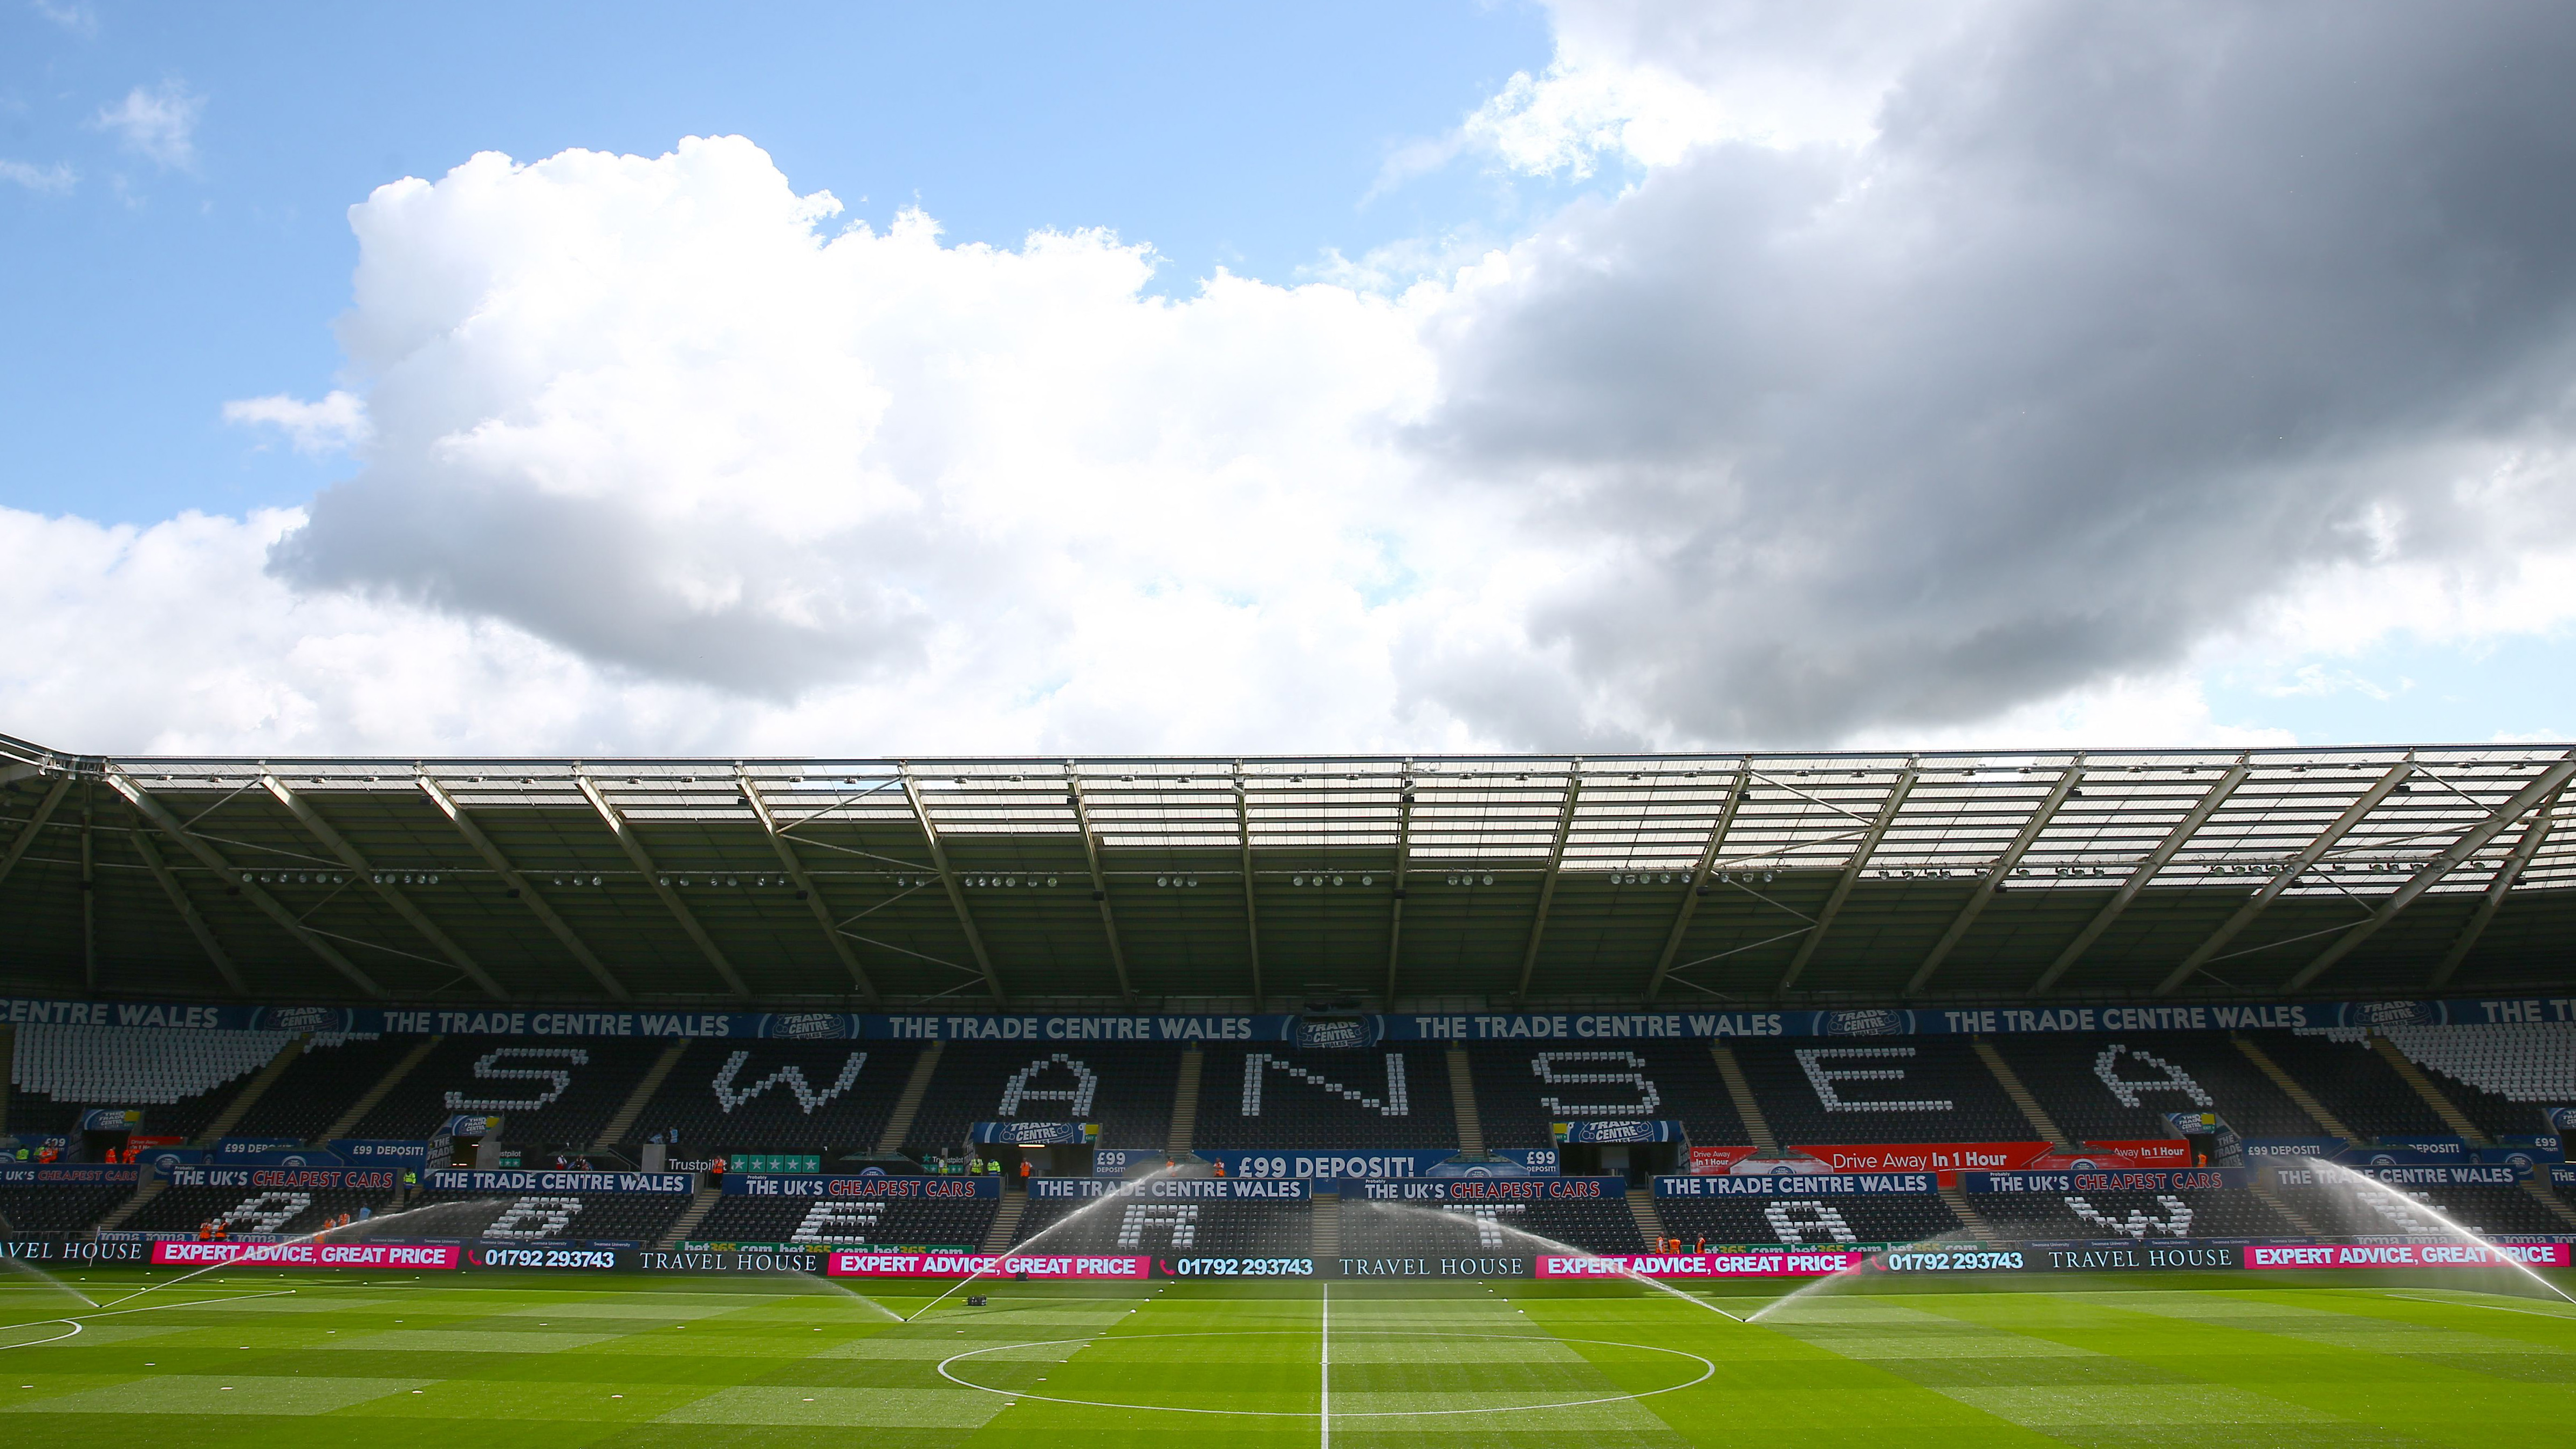 General view of the East Stand at Swansea.com Stadium